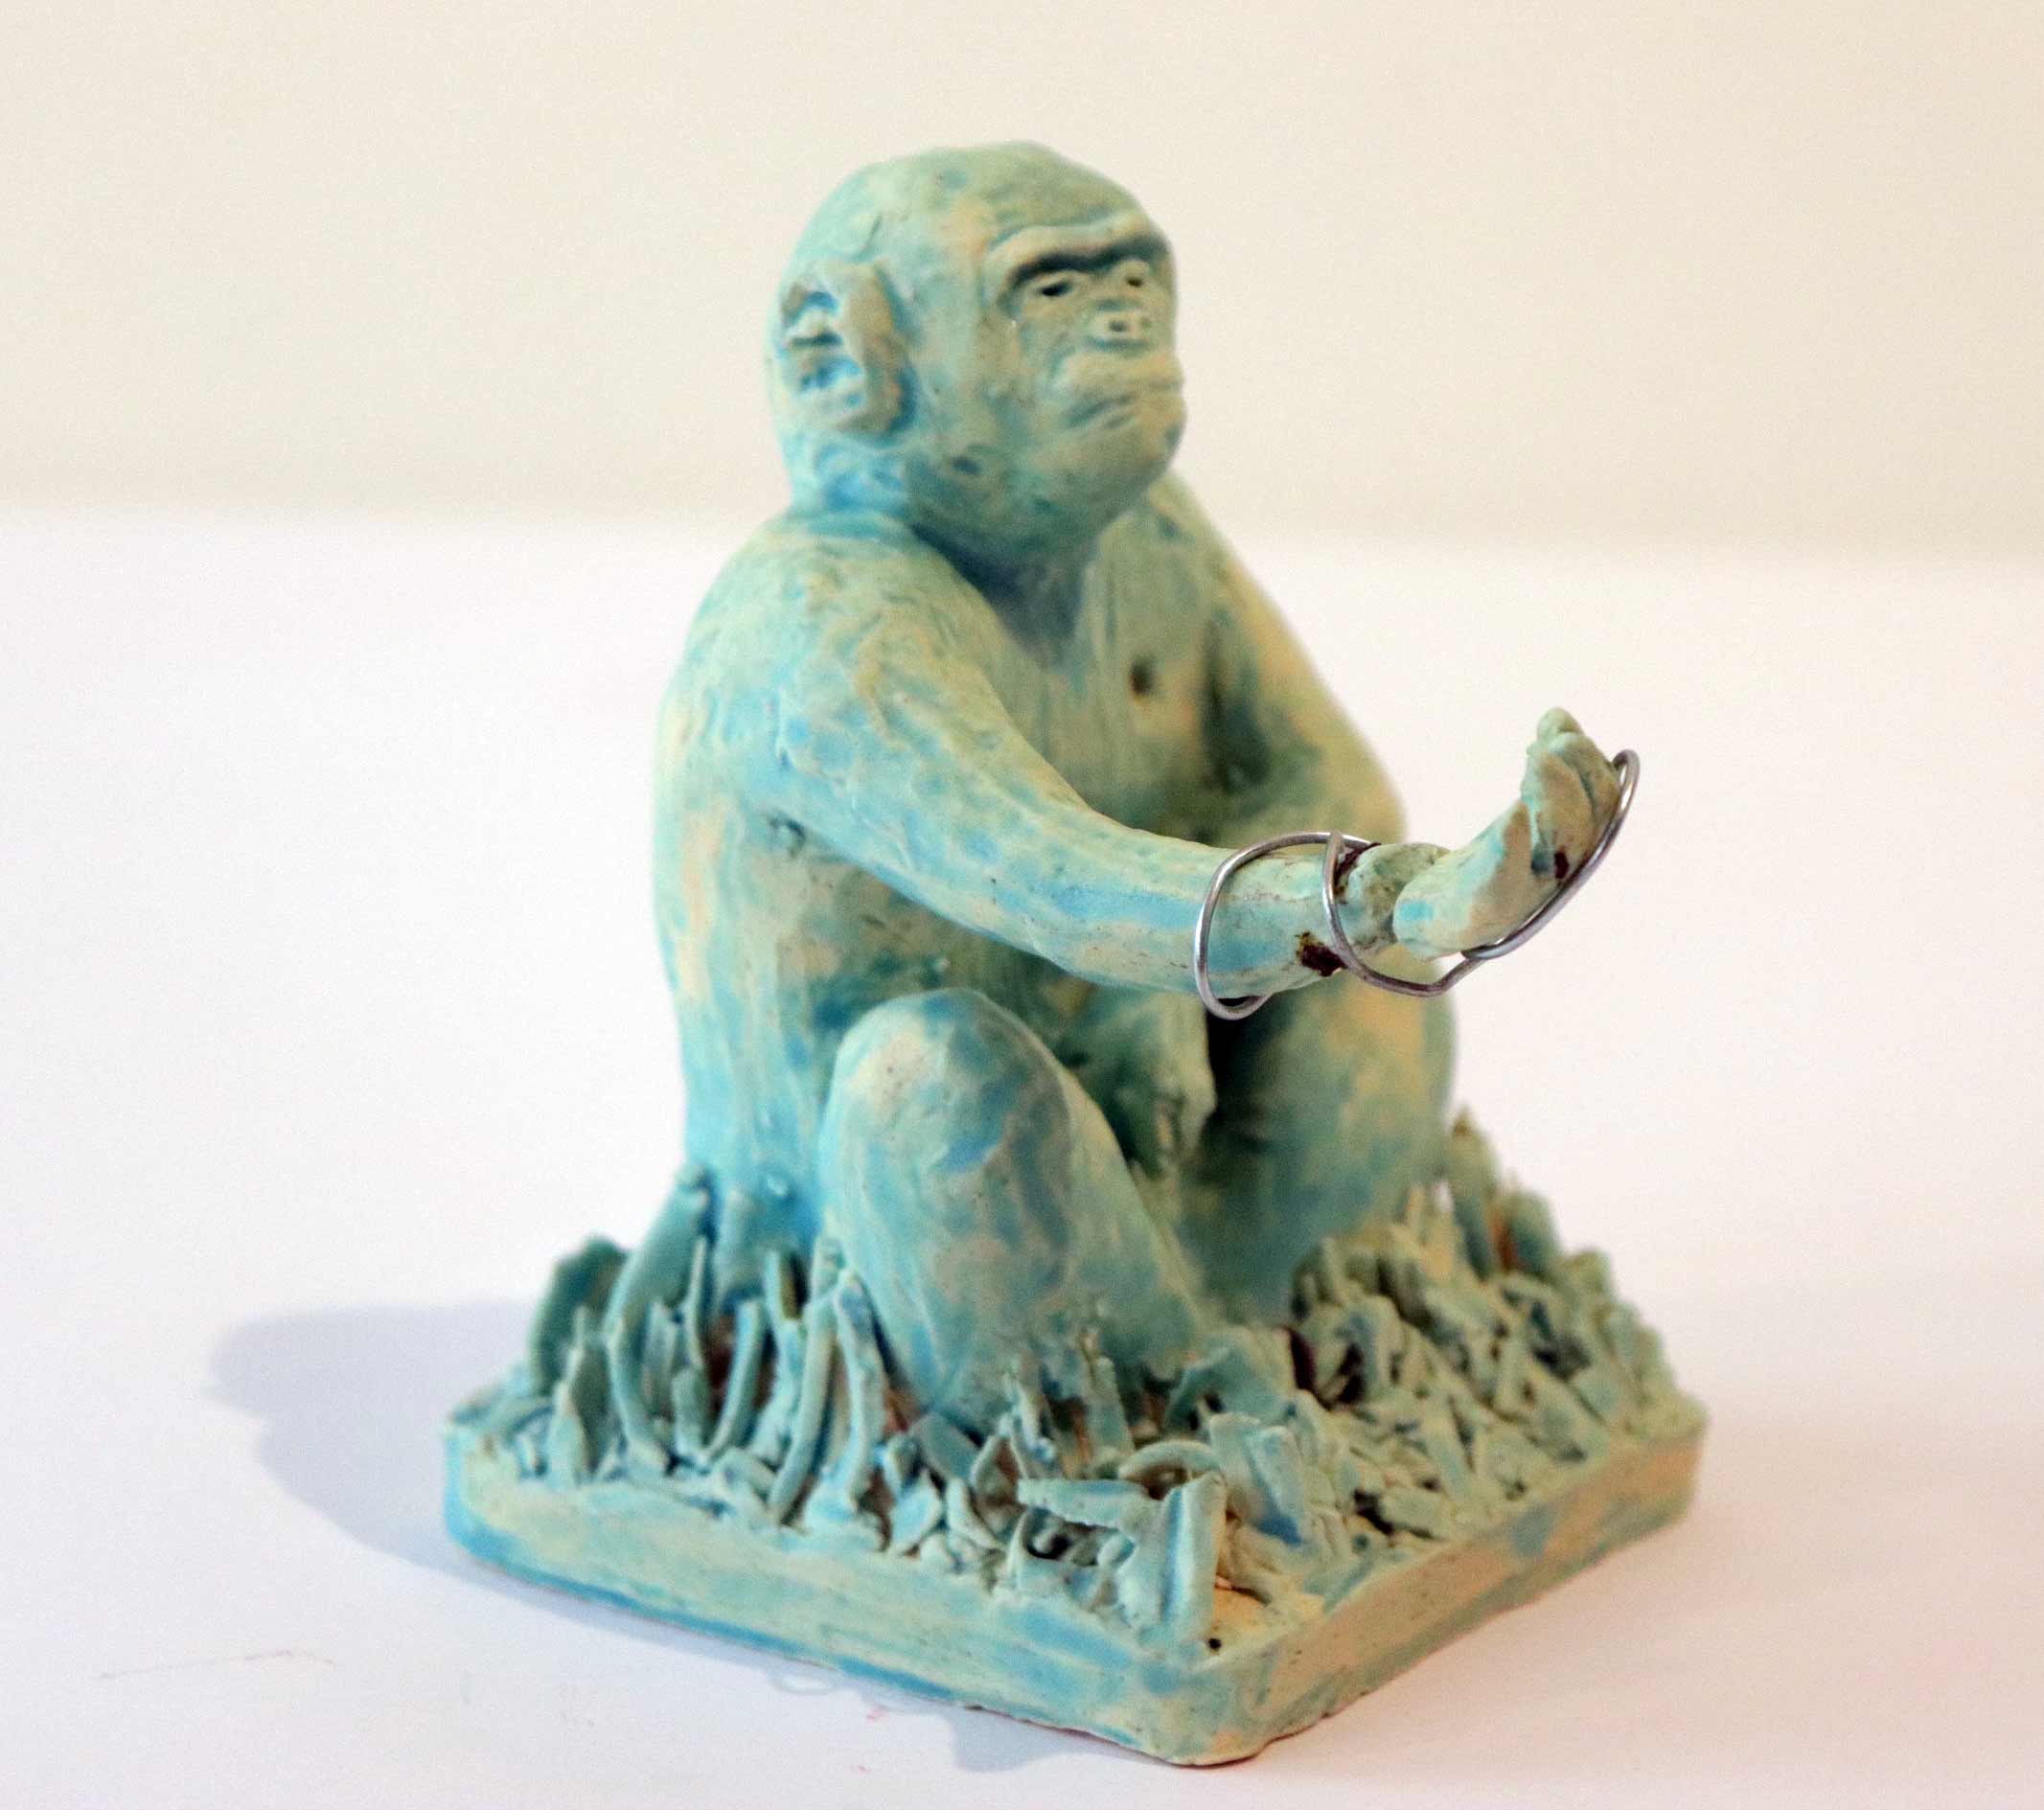 A small turquoise sculpture of a n ape